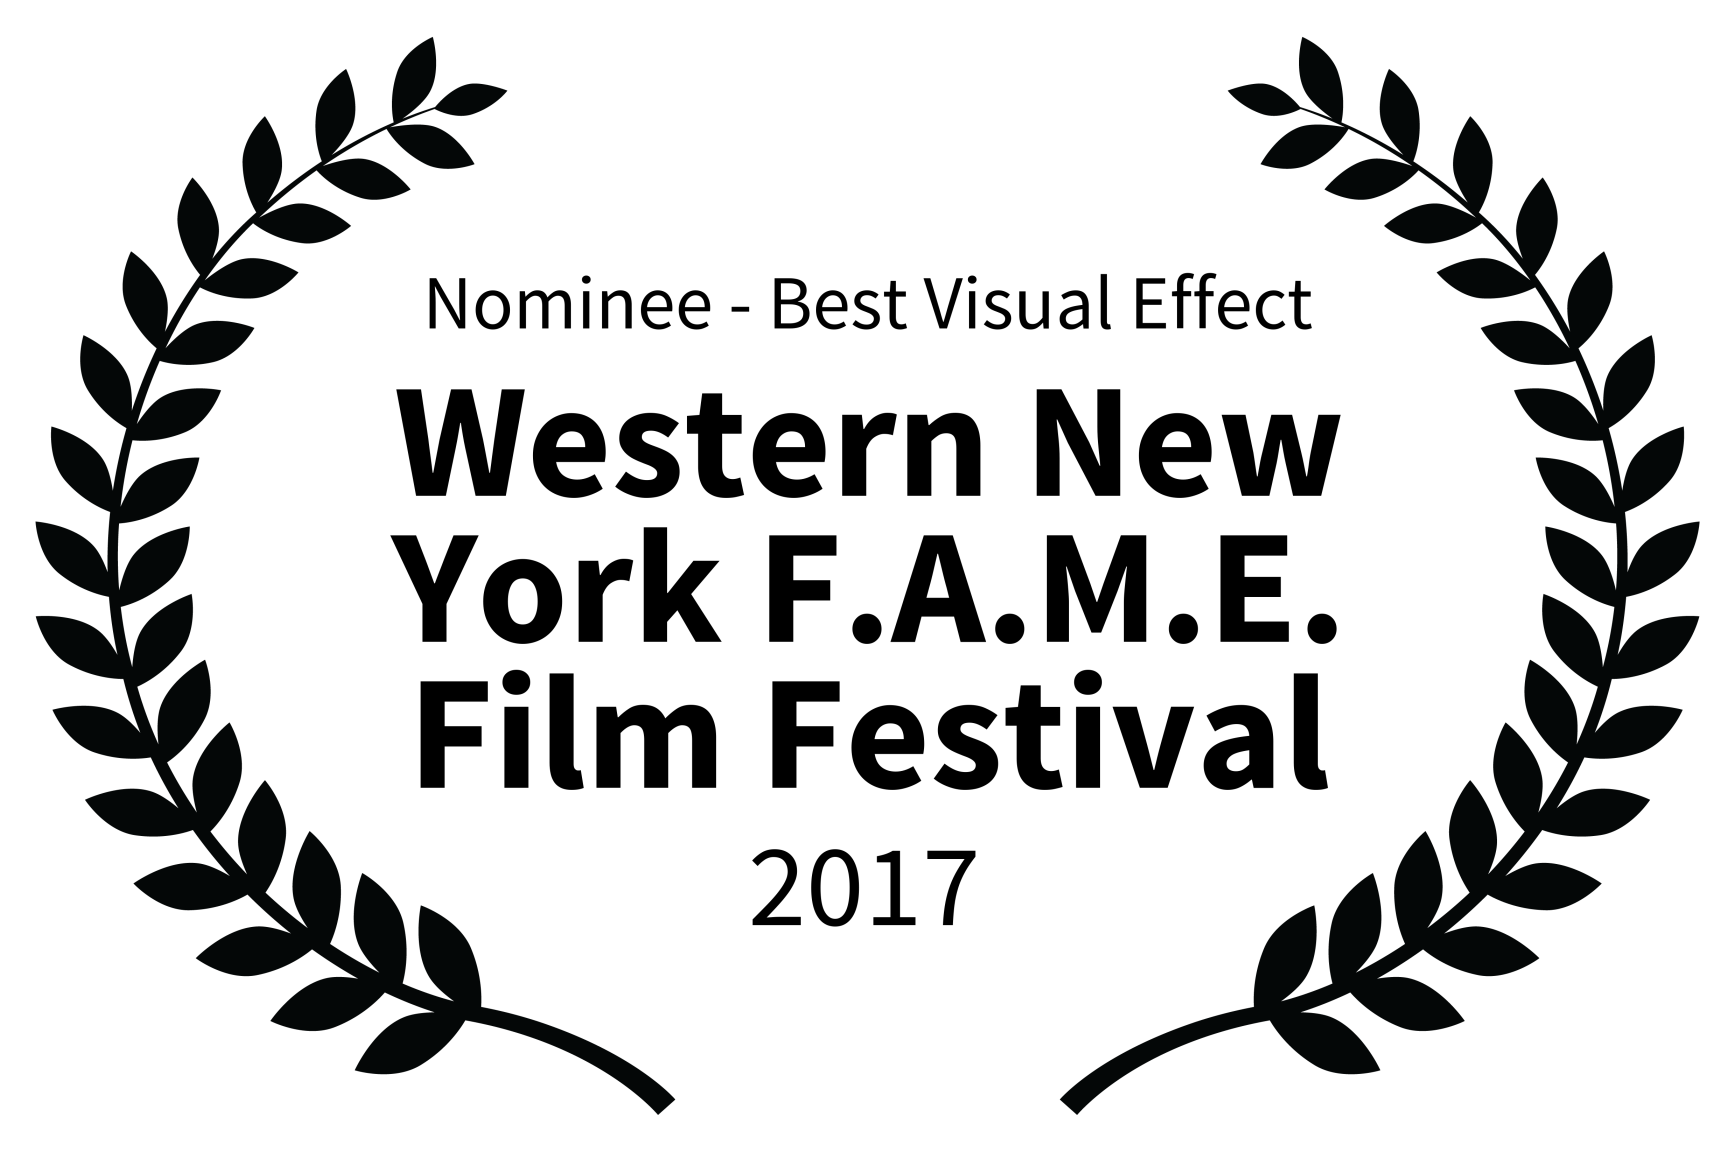 FAME Best Visual Effect - Western New York F.A.M.E. Film Festival - 2017.png